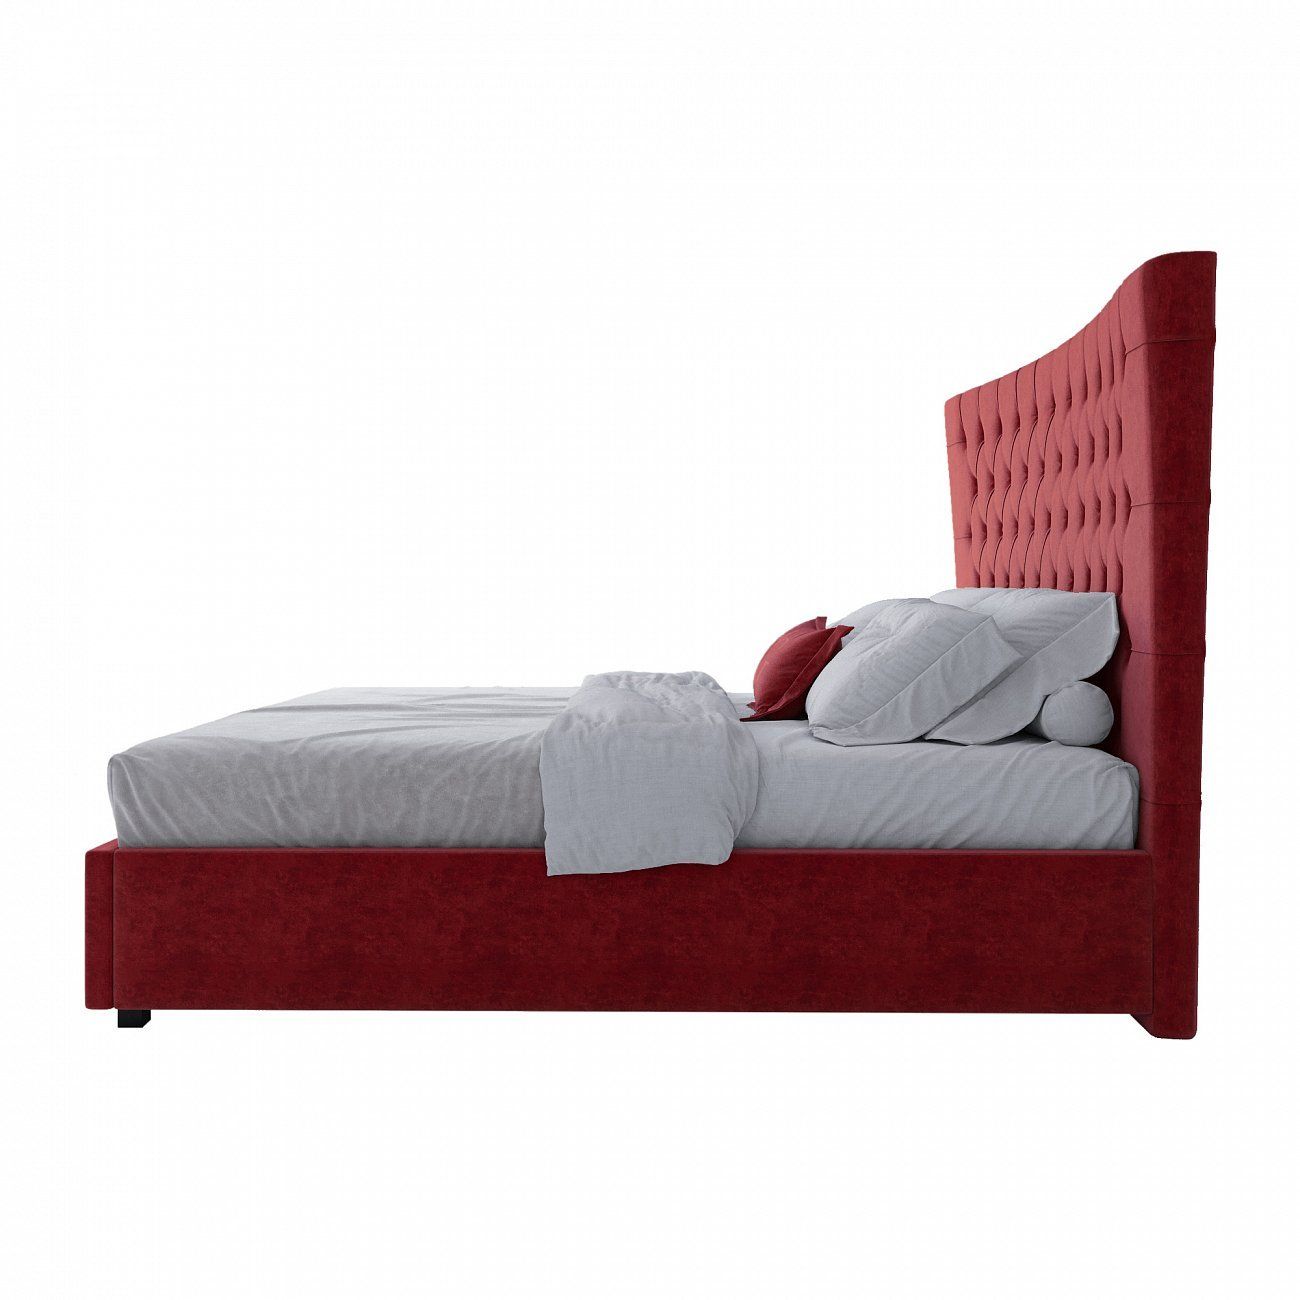 Double bed 180x200 red velour QuickSand